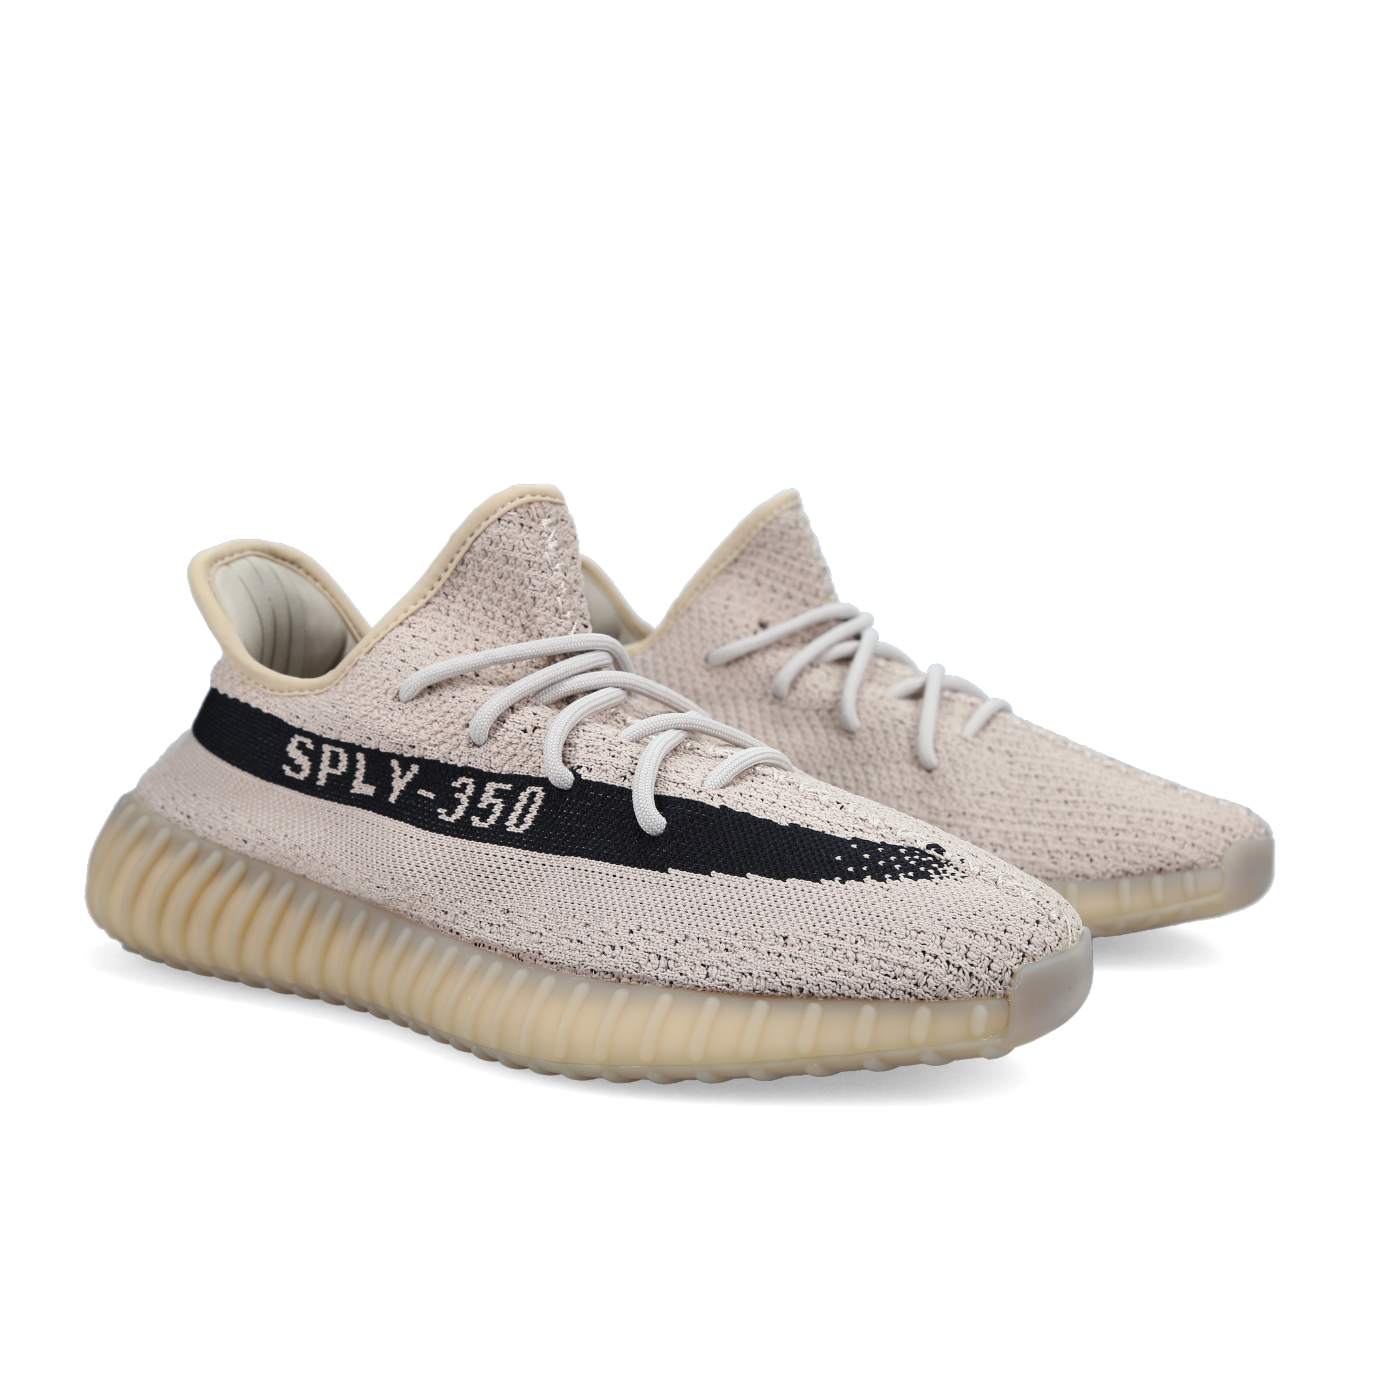 Yeezy Boost 350 V2 'Slate' - Front View